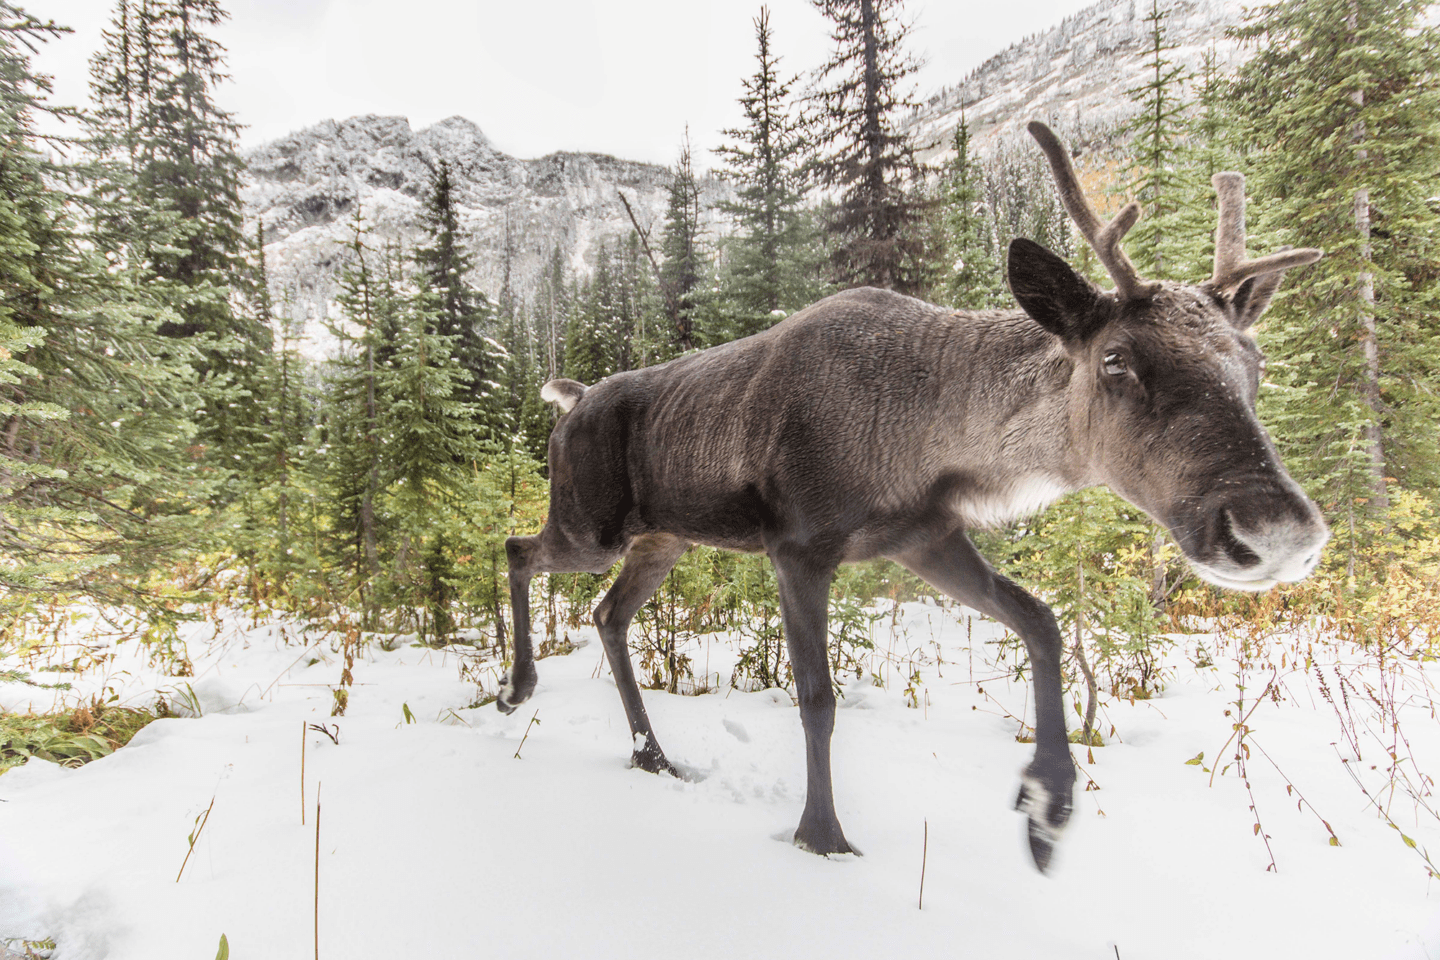 Mountain caribou walks over the snow. Photo credit: David Moskowitz